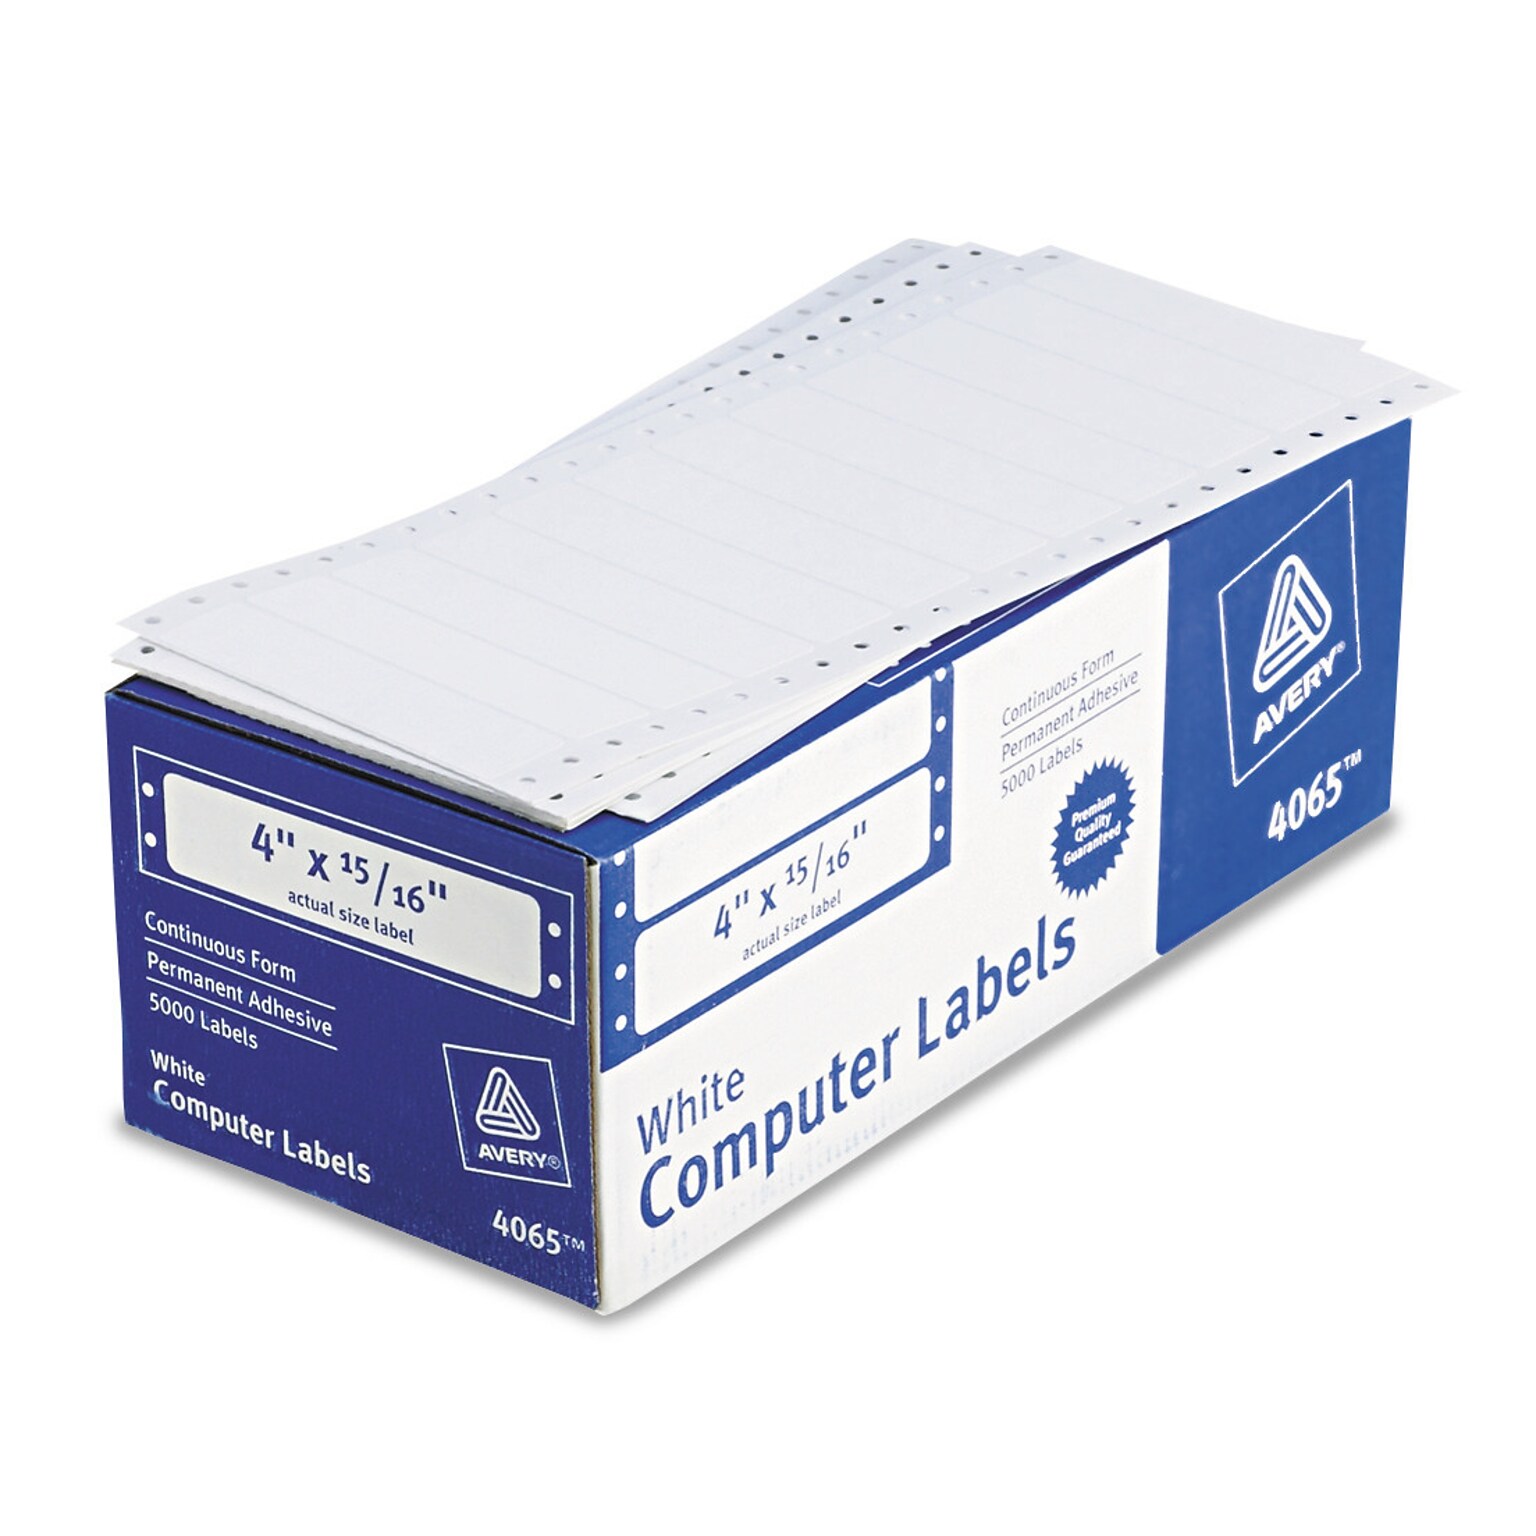 Avery Pin-Fed Continuous Form Computer Labels, 15/16 x 4, White, 1 Label Across, 5 Carrier, 5,000 Labels/Box (4065)